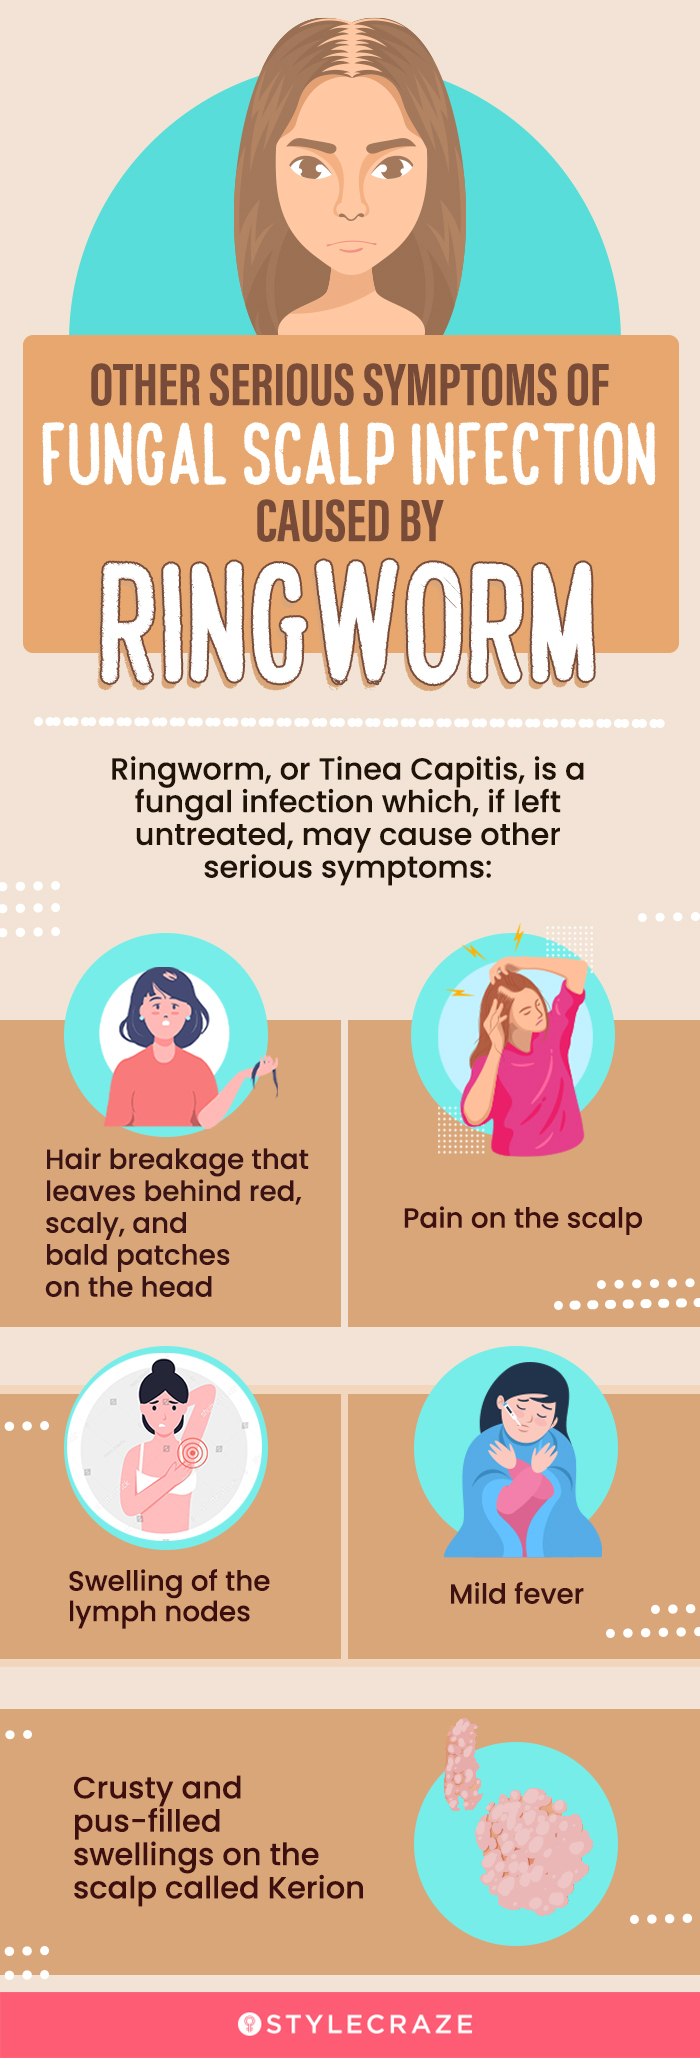 other serious symptoms of fungal scalp infection caused by ringworm [infographic]